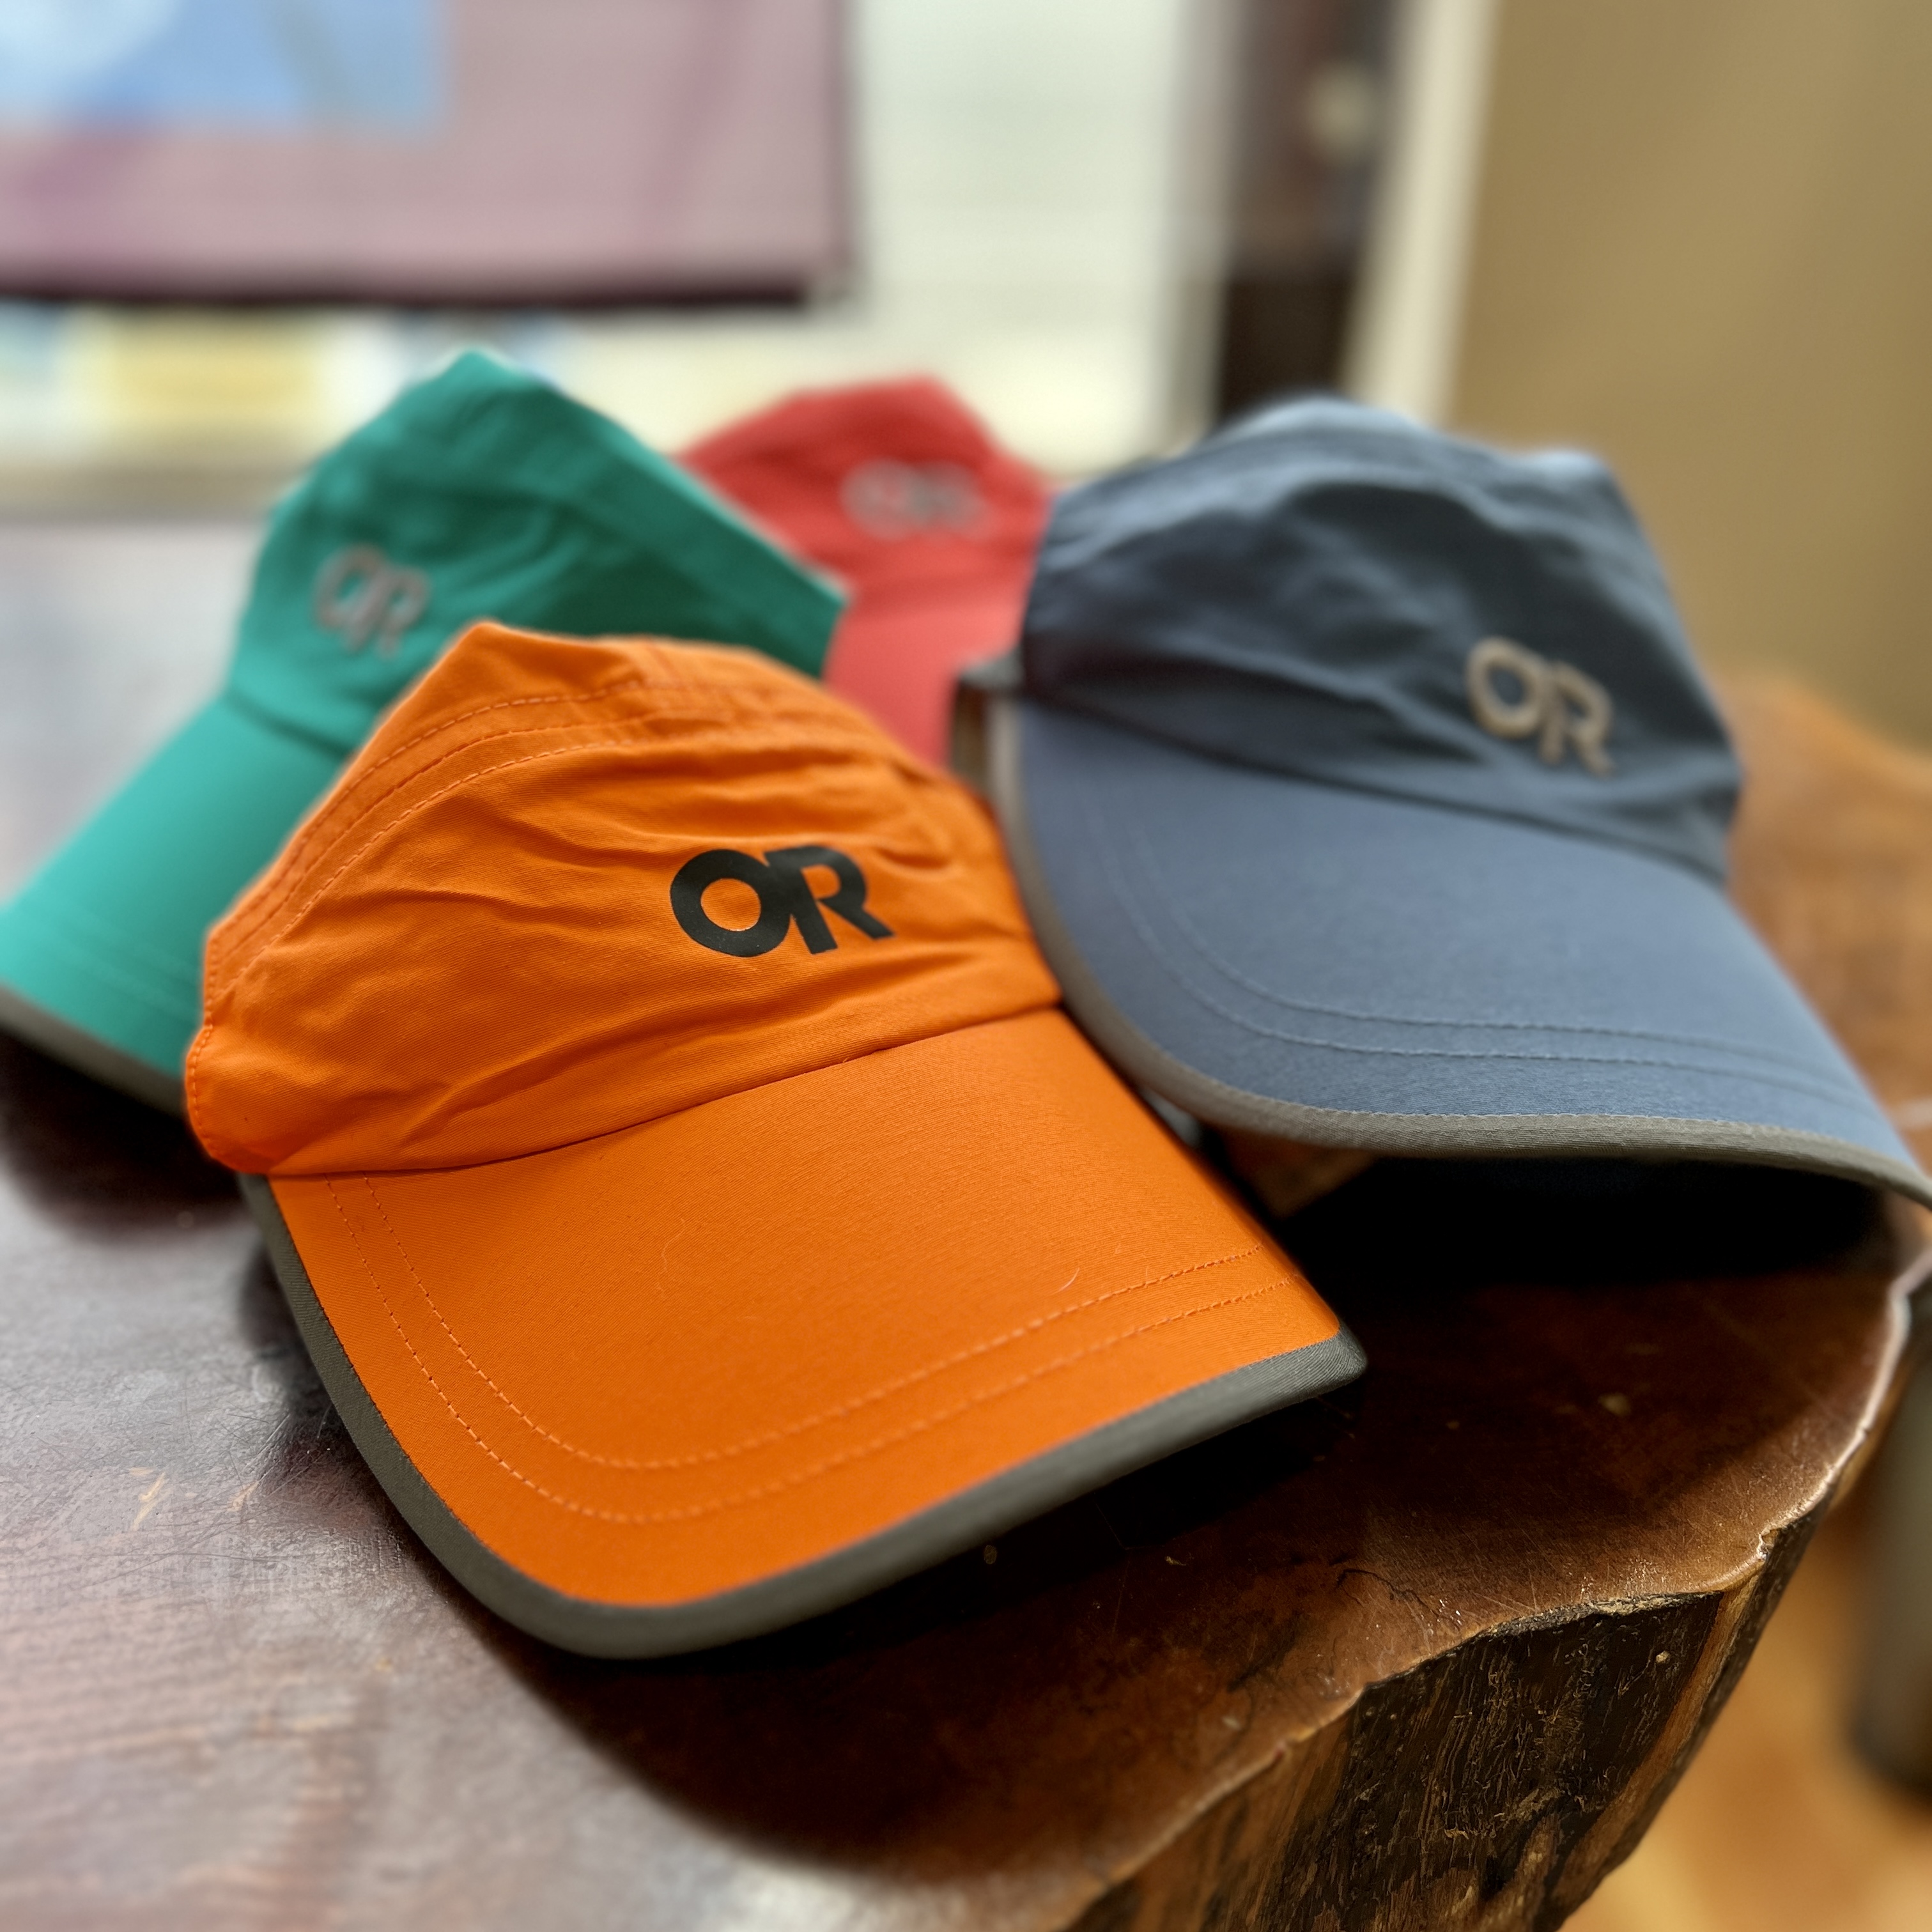 Outdoor Research brand lightweight running hats in an assortment of colors